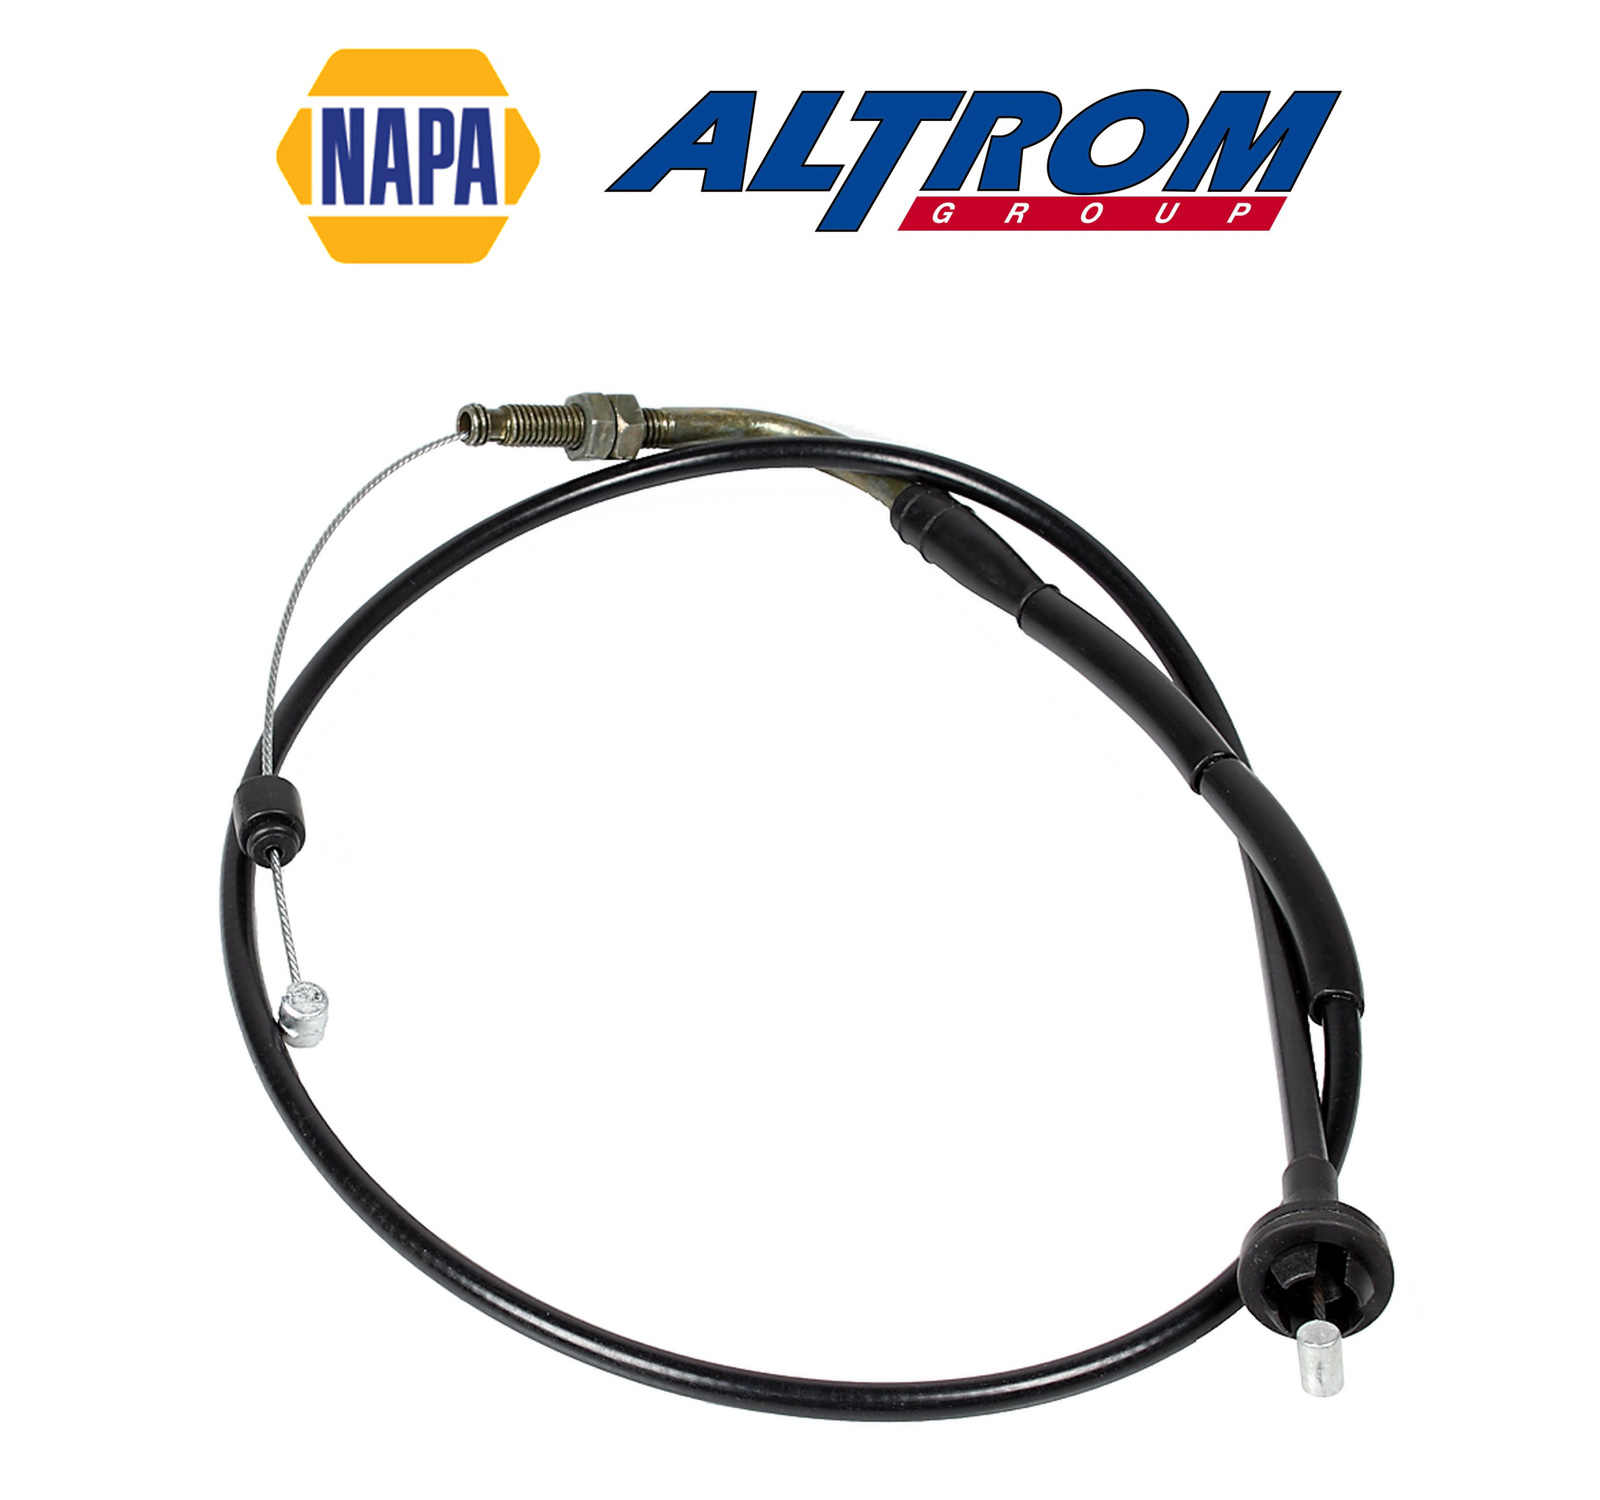 Suzuki Samurai Throttle Cable Fuel Injected Carburated Accelerator Cable 86-89